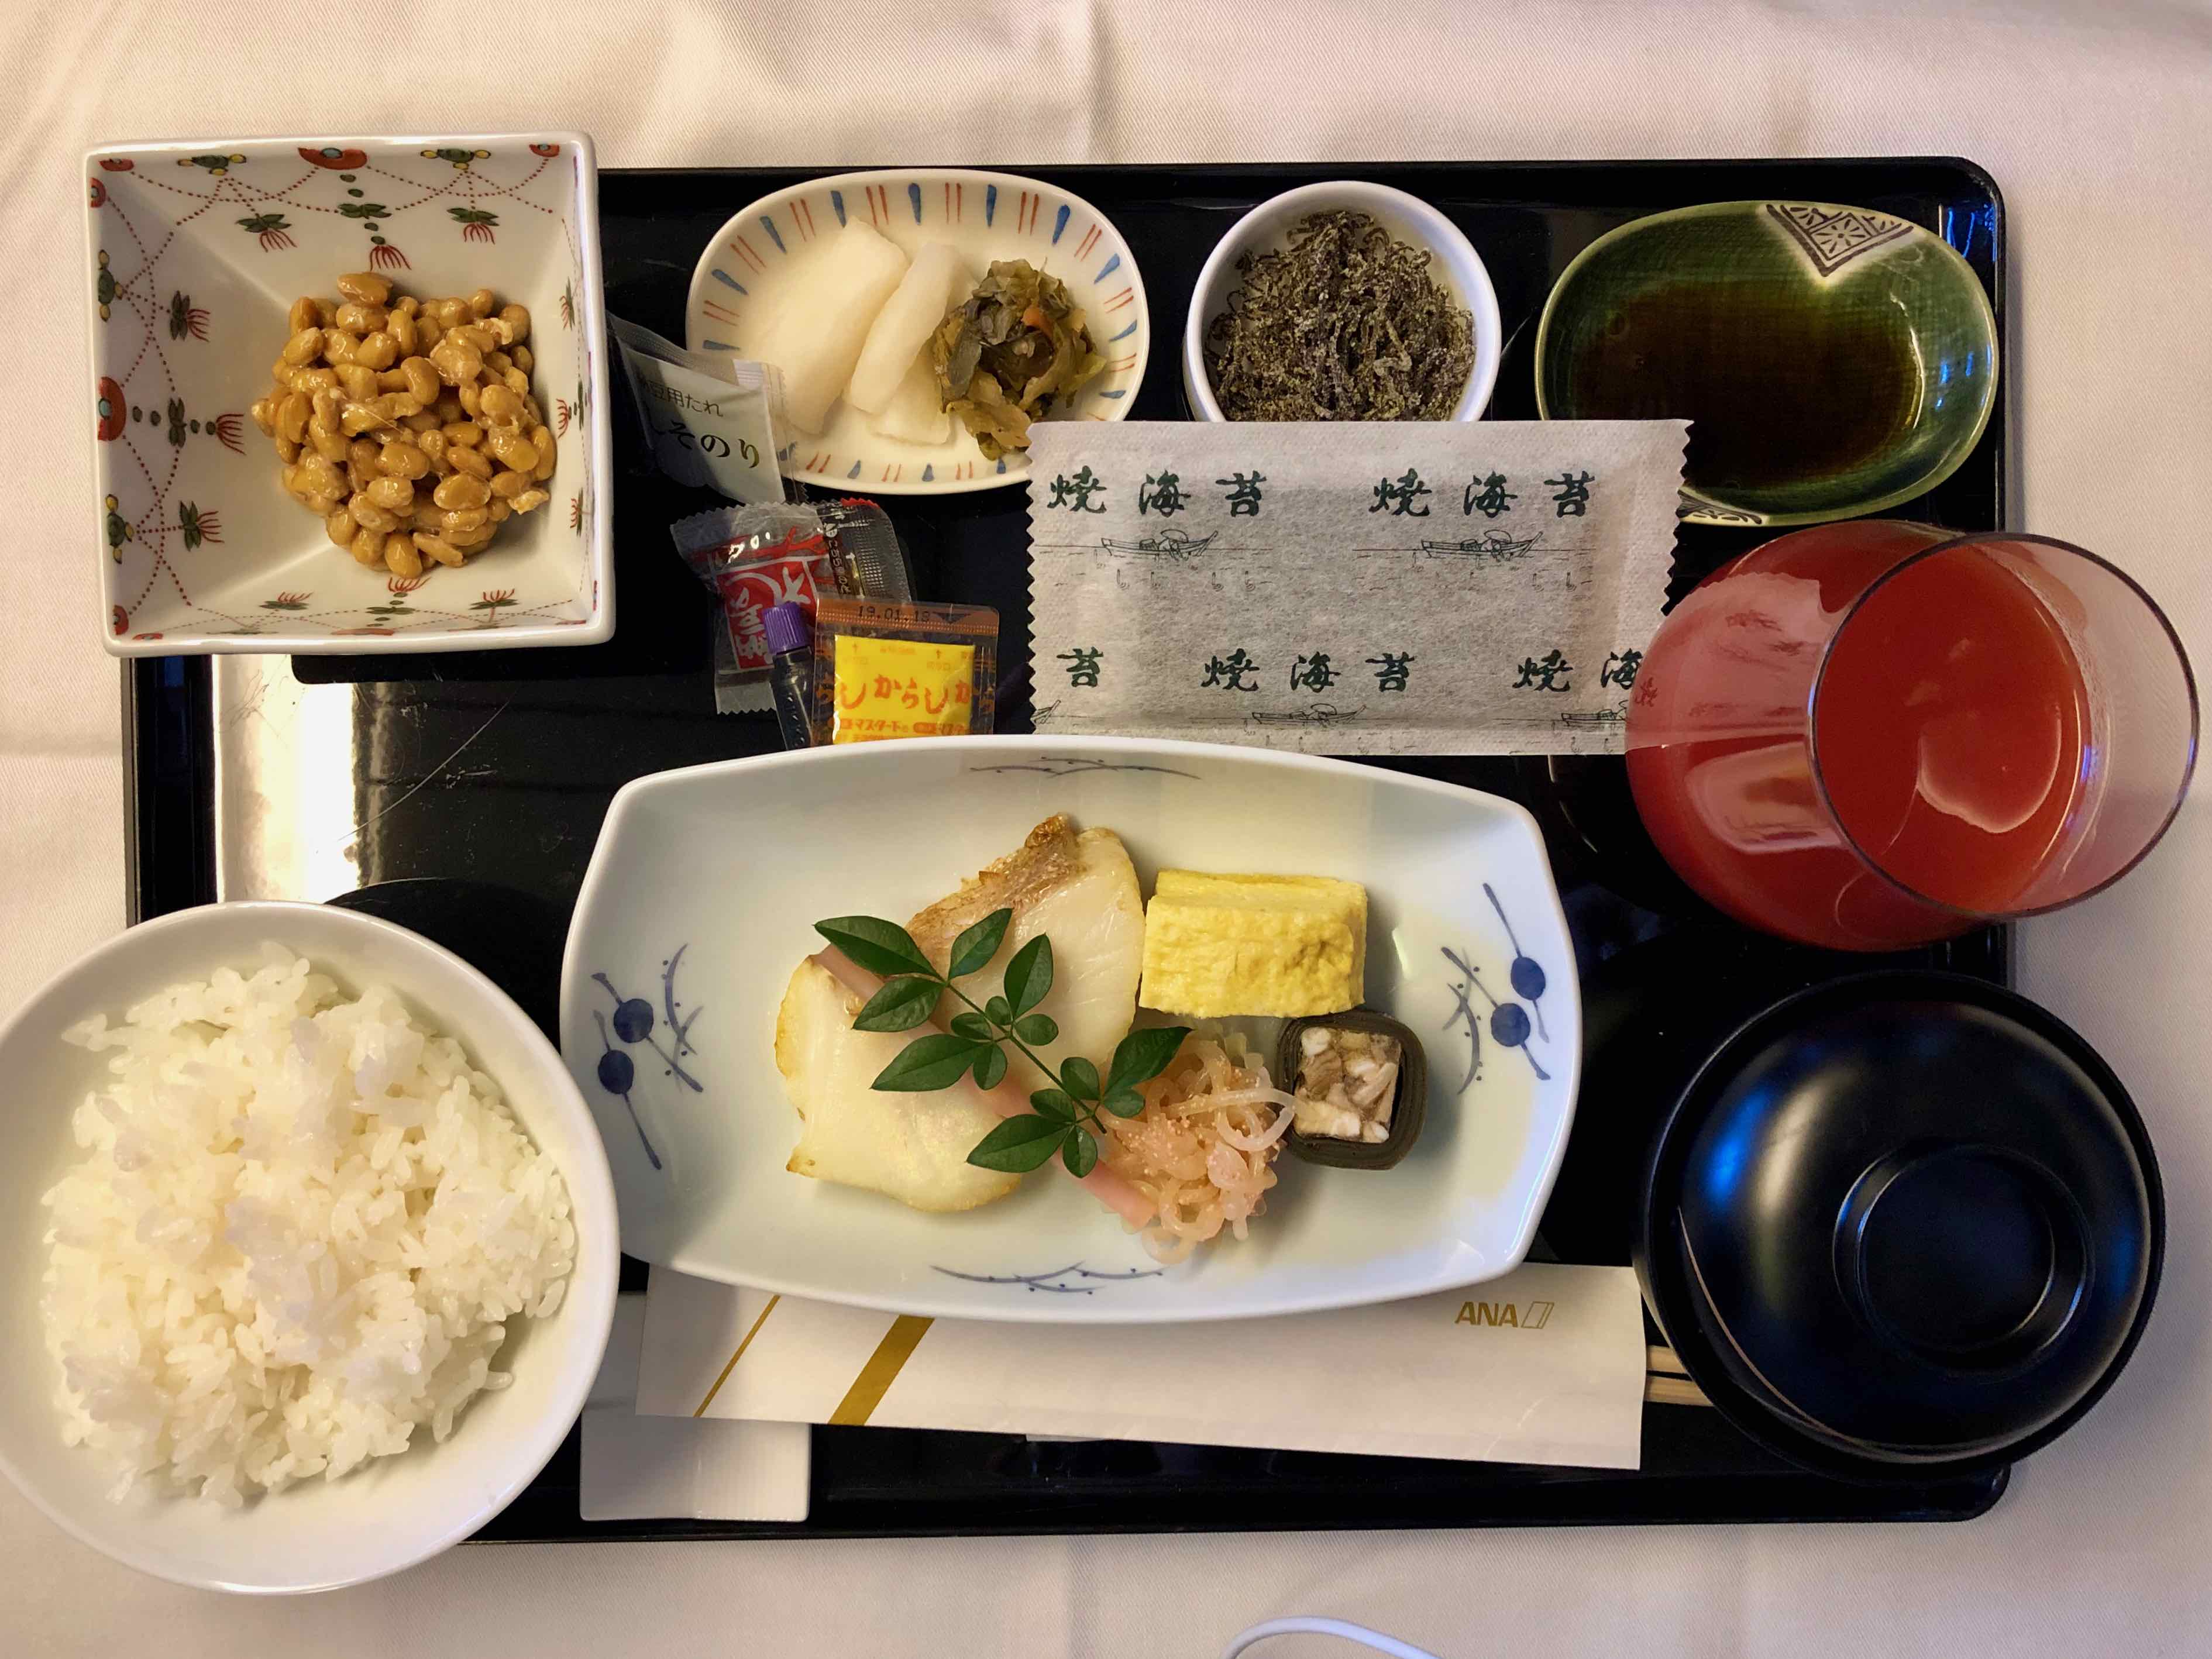 ANA 777 First Class meal